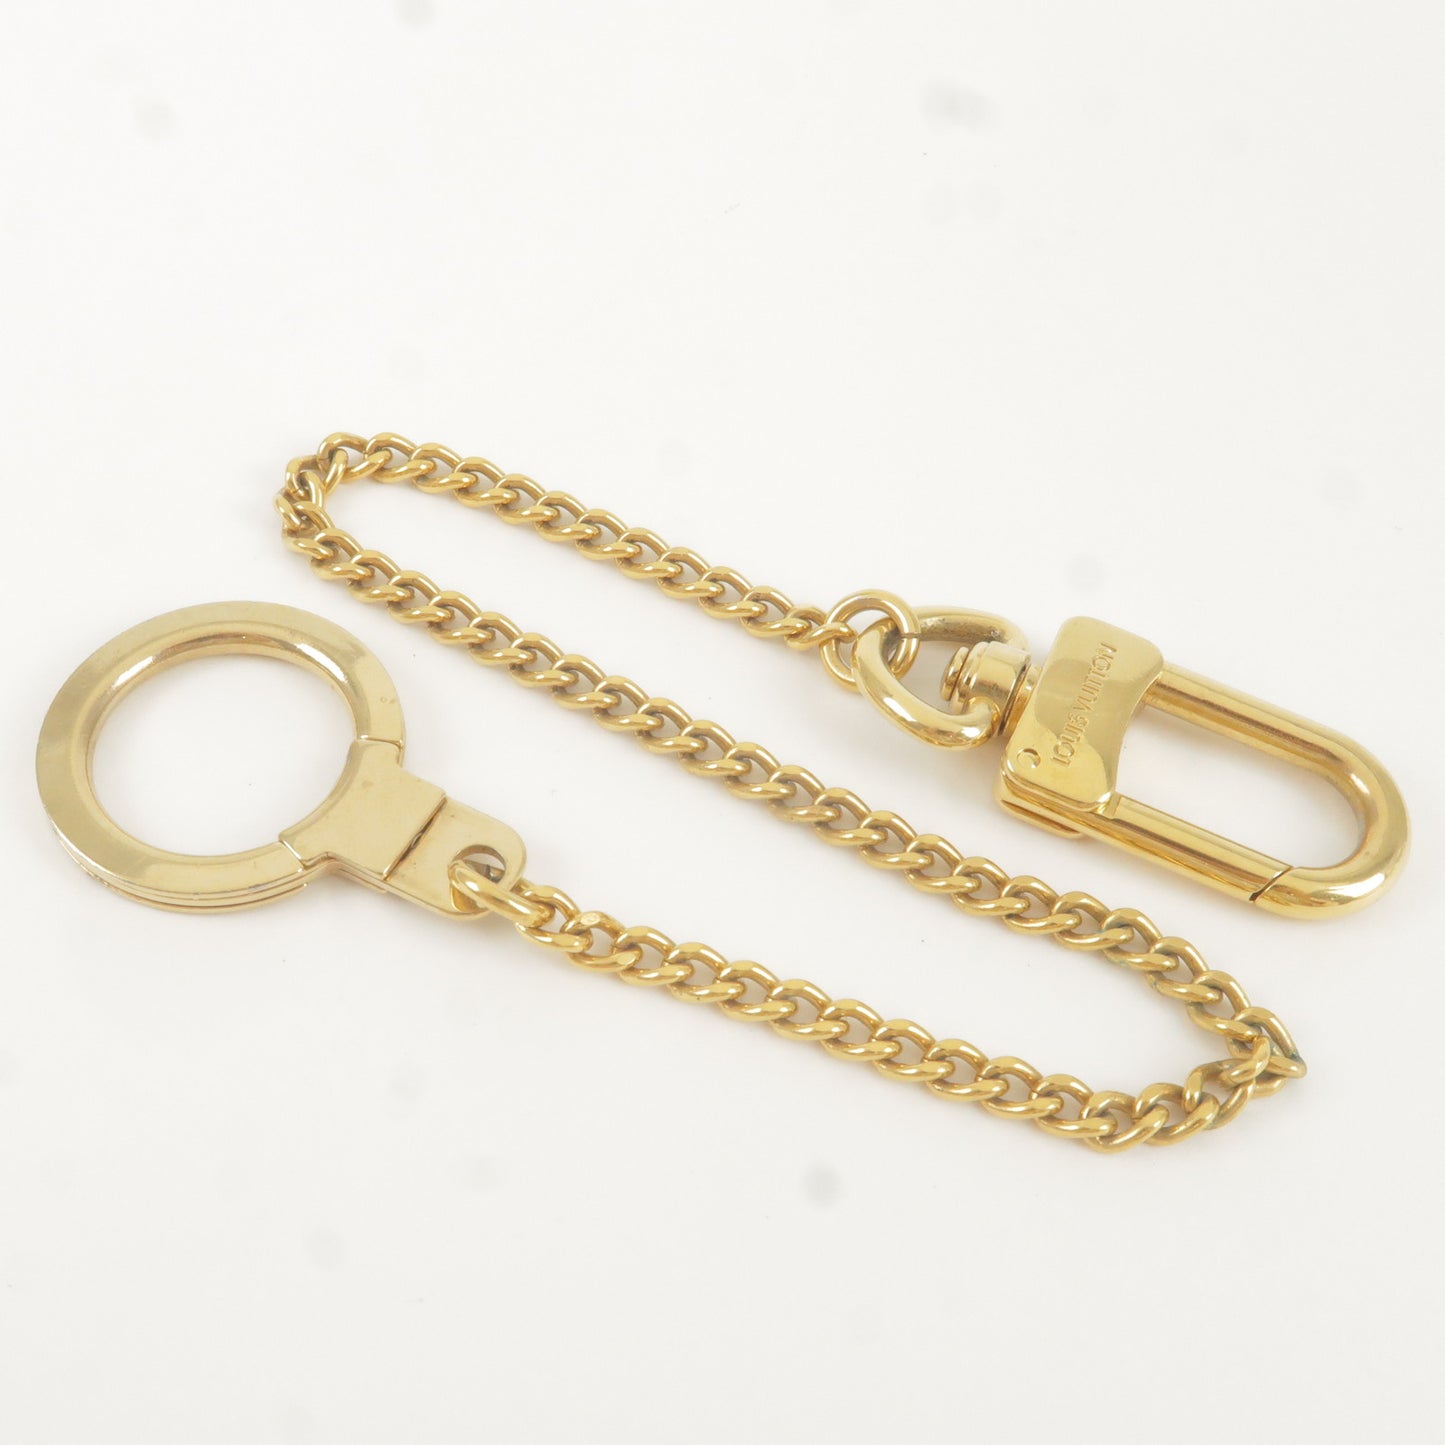 Authentic Louis Vuitton Chenne Ano Cles Key Chain Key Charm Gold M58021 Used F/S